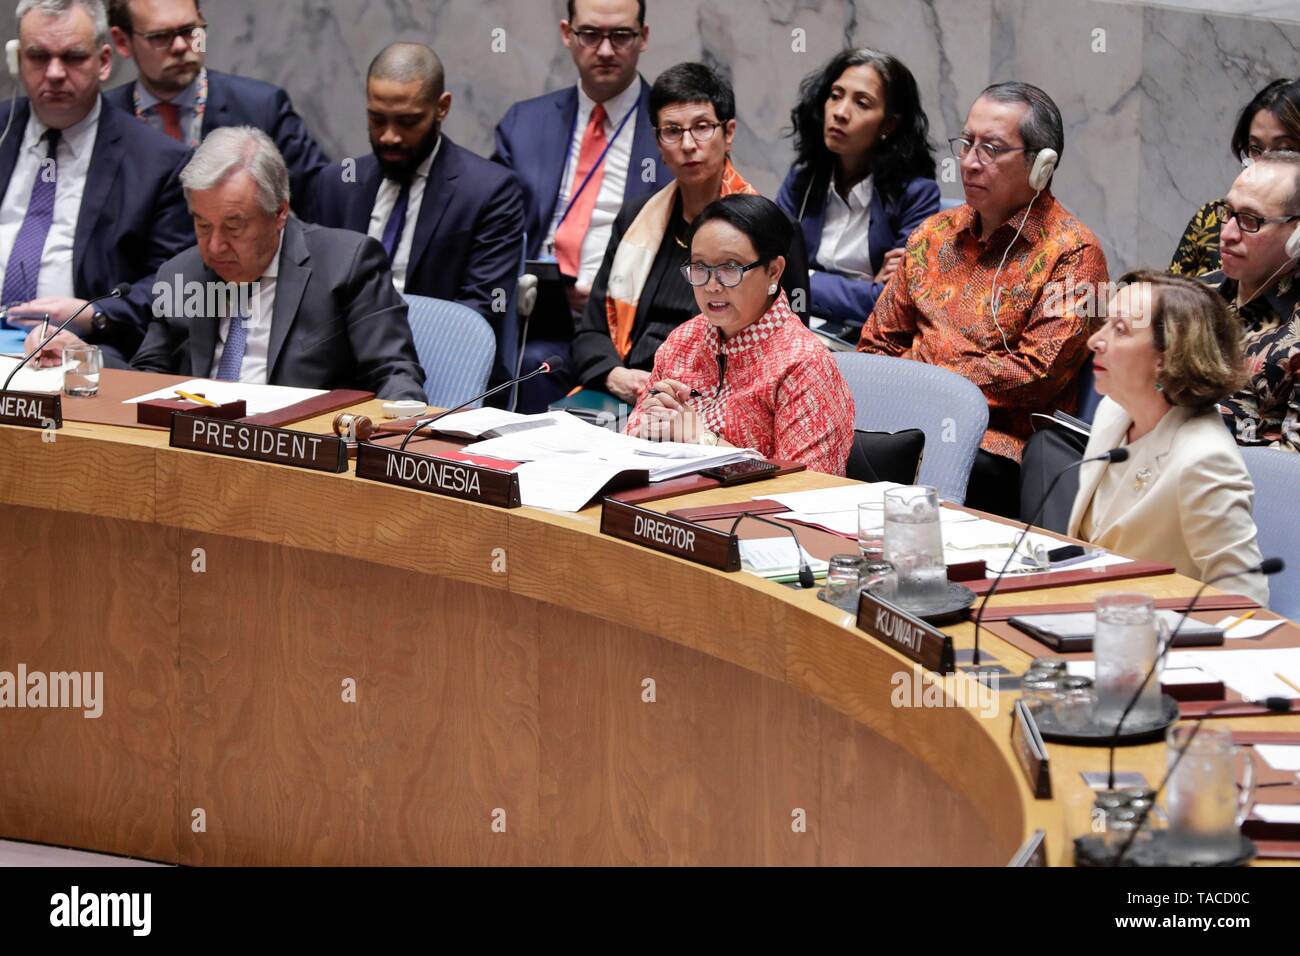 United Nations, New York, USA, May 23, 2019 - Retno Lestari Priansari Marsudi, Minister for Foreign Affairs of the Republic of Indonesia and President of the Security Council for the month of May, chairs the Security Council debate on protection of civilians in armed conflict today at the UN Headquarters in New York. Photo: Luiz Rampelotto/EuropaNewswire PHOTO CREDIT MANDATORY. | usage worldwide Stock Photo